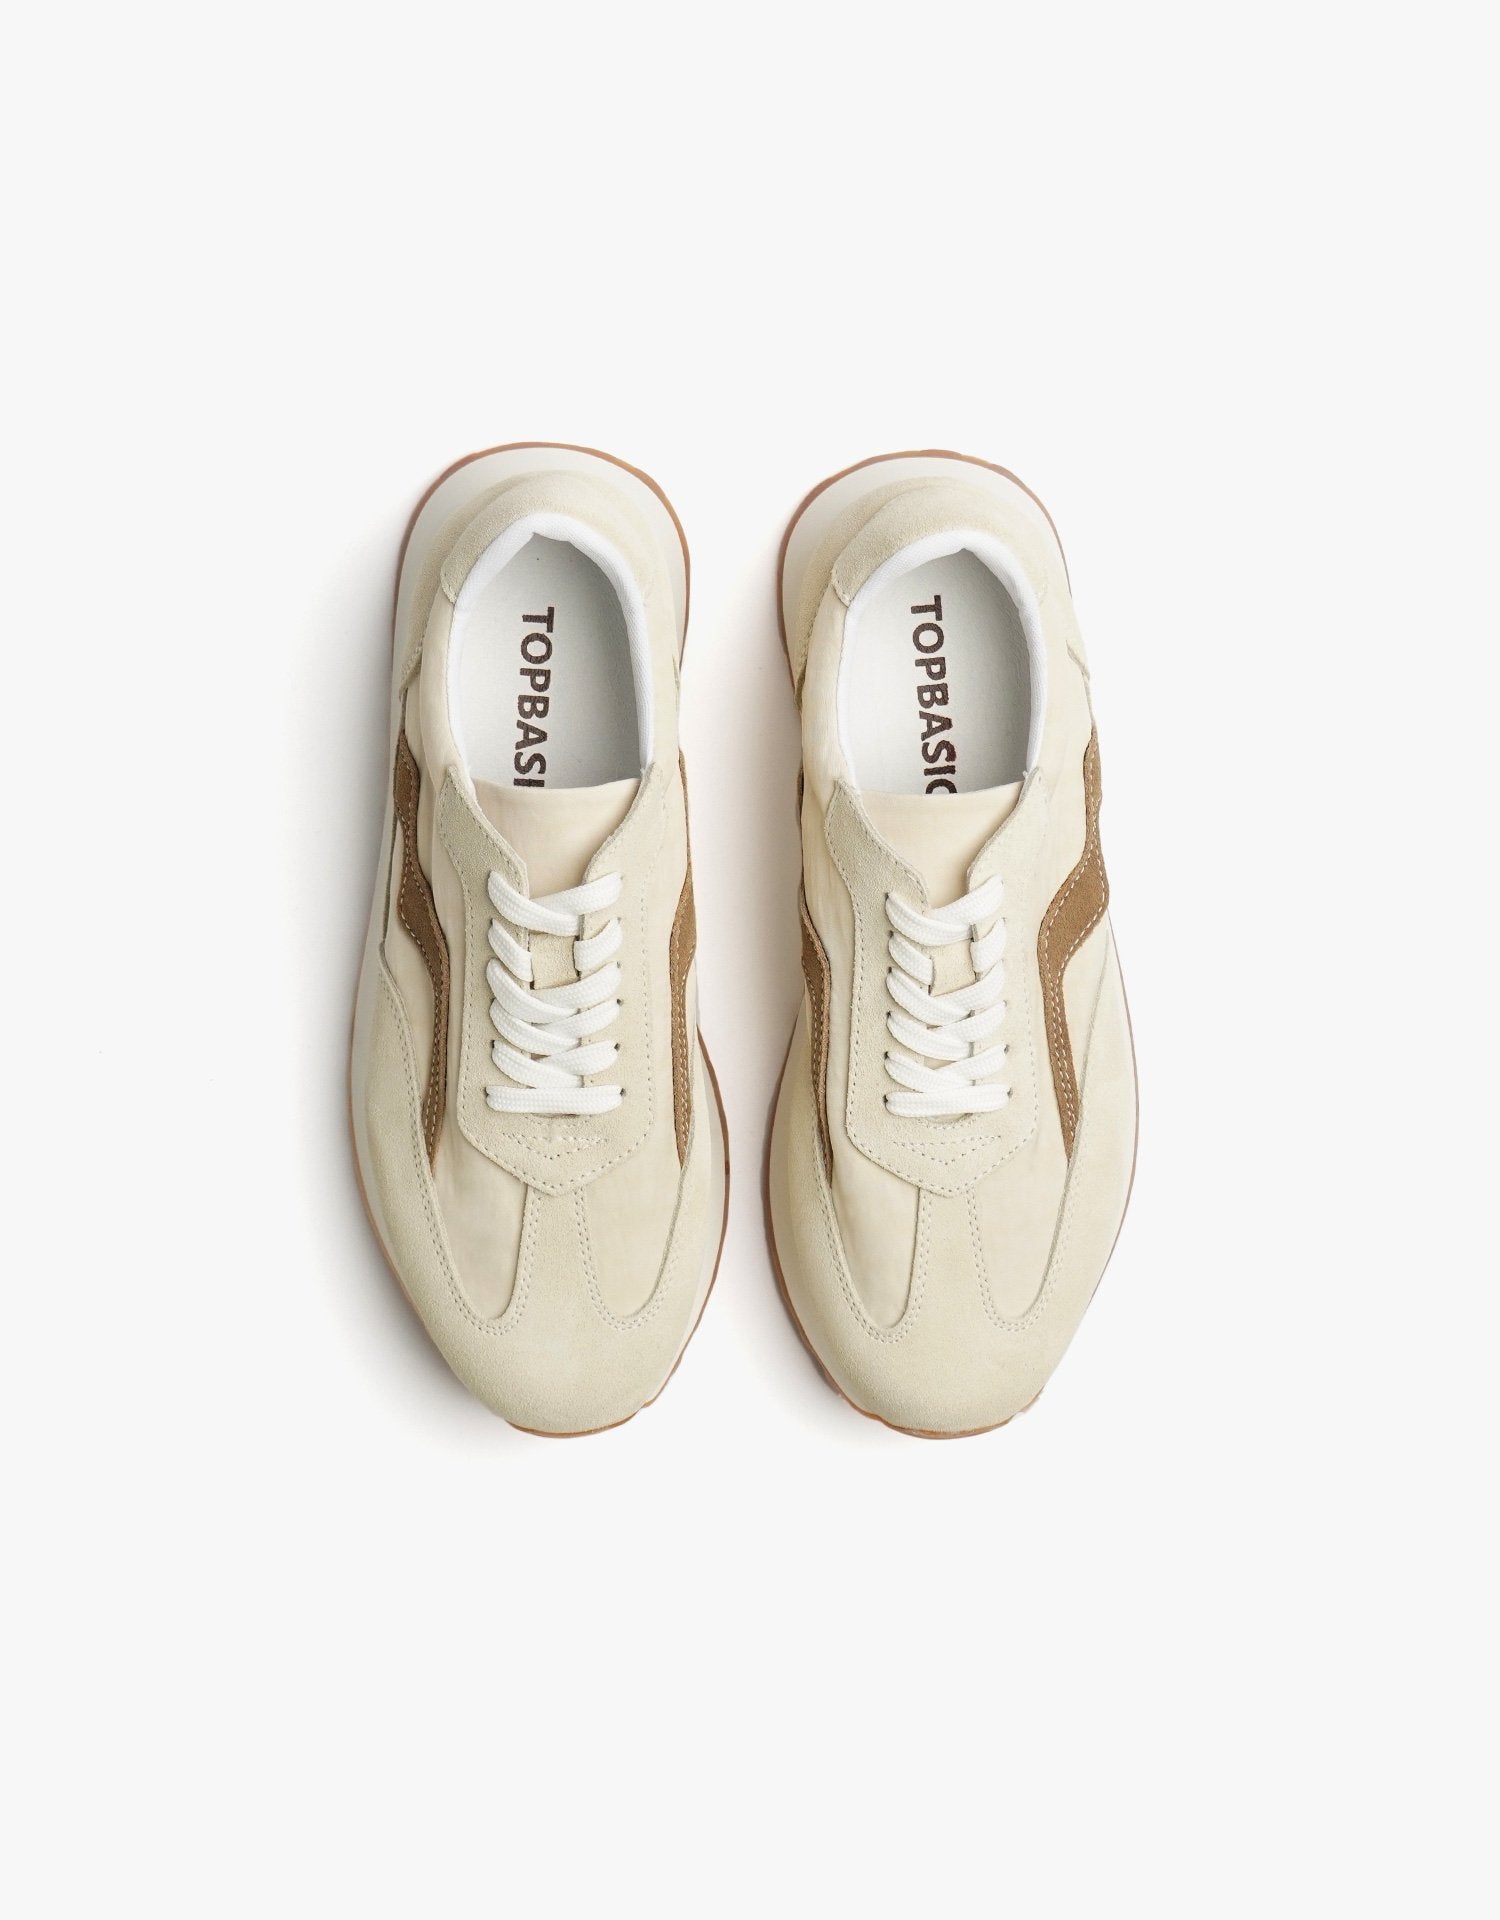 TopBasics Suede M-Pat. Running Shoes